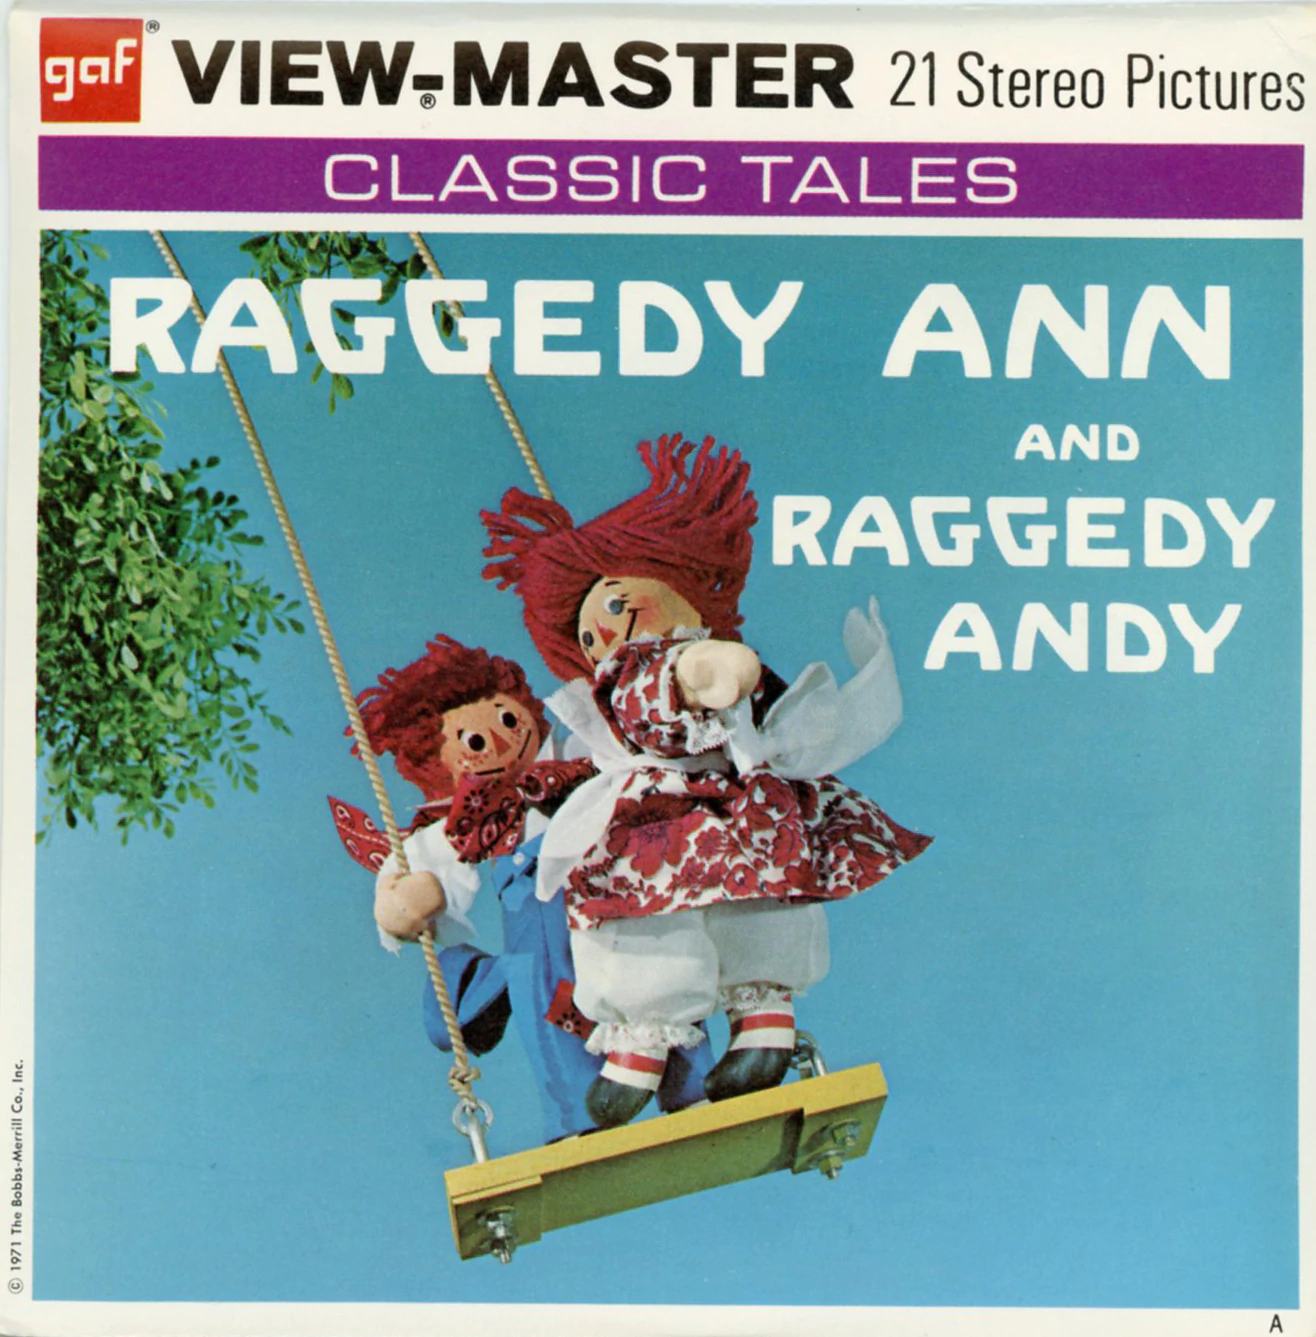 https://static.wikia.nocookie.net/raggedyann/images/c/c2/Raggedy_Ann_and_Andy_Viewmaster.webp/revision/latest?cb=20220520033002